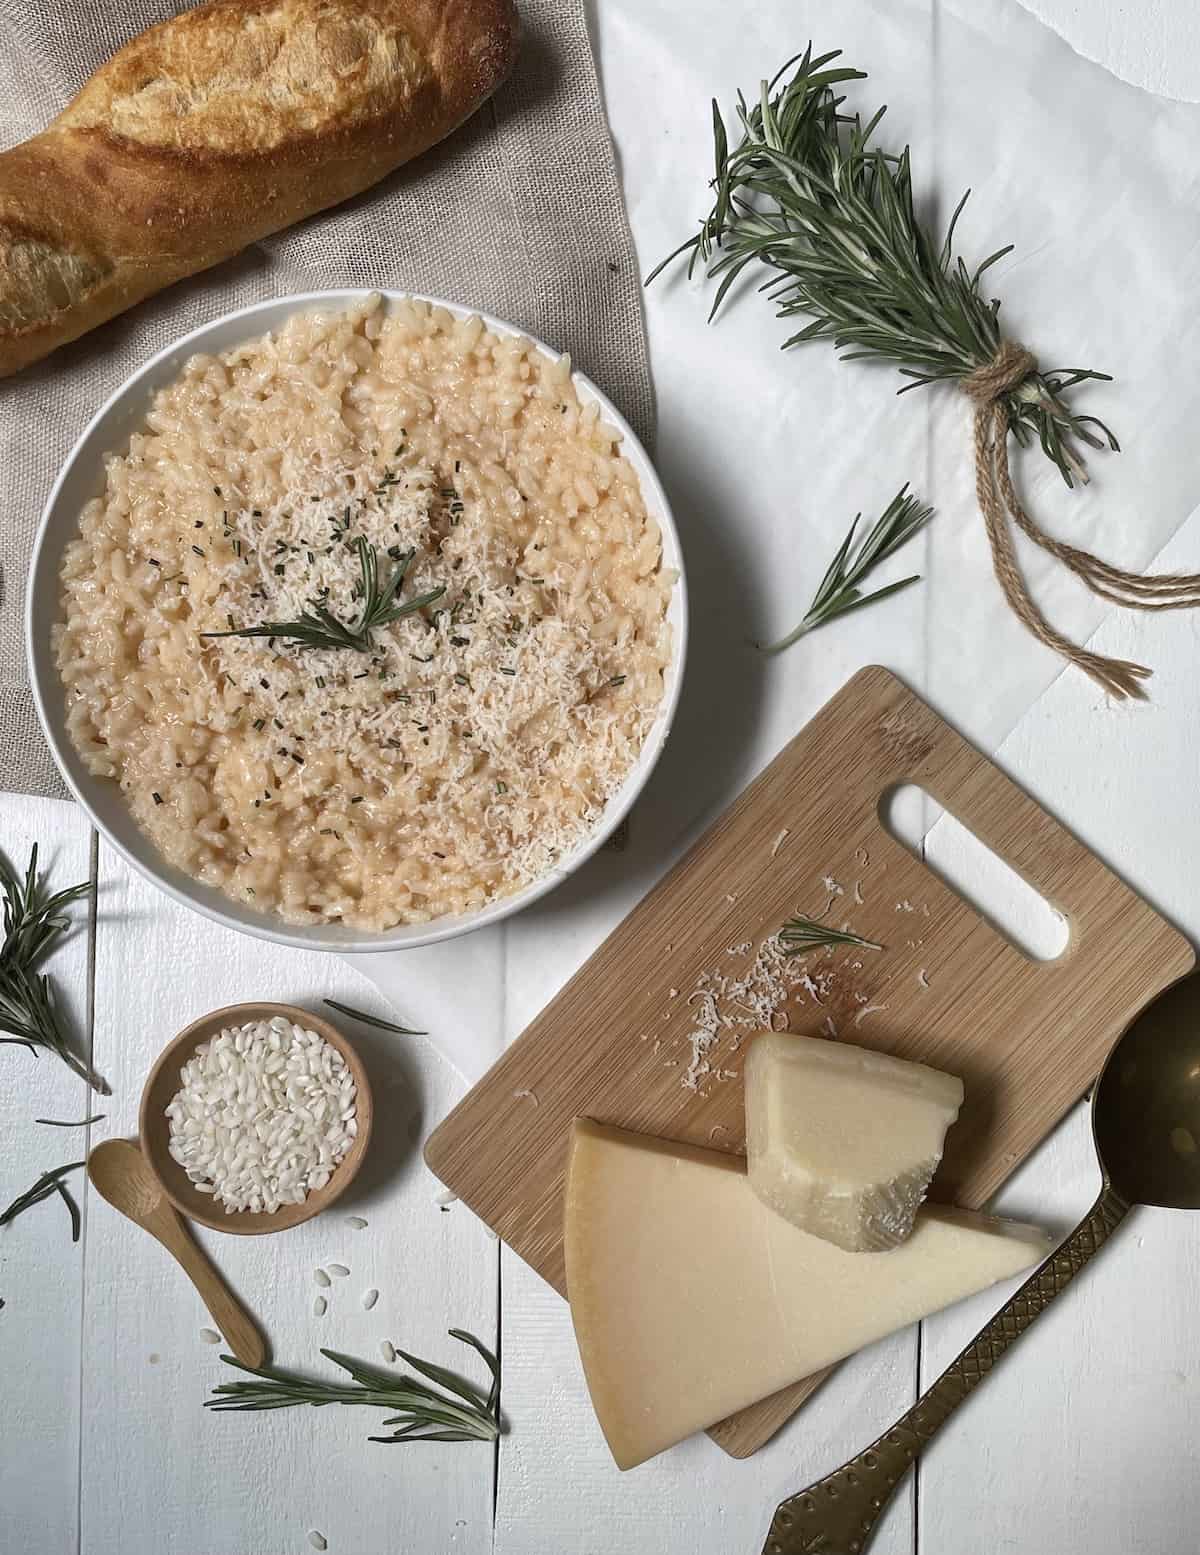 Risotto with cheese in a white bowl with rice, cheese on cutting board, rosemary, bread, on a white table.